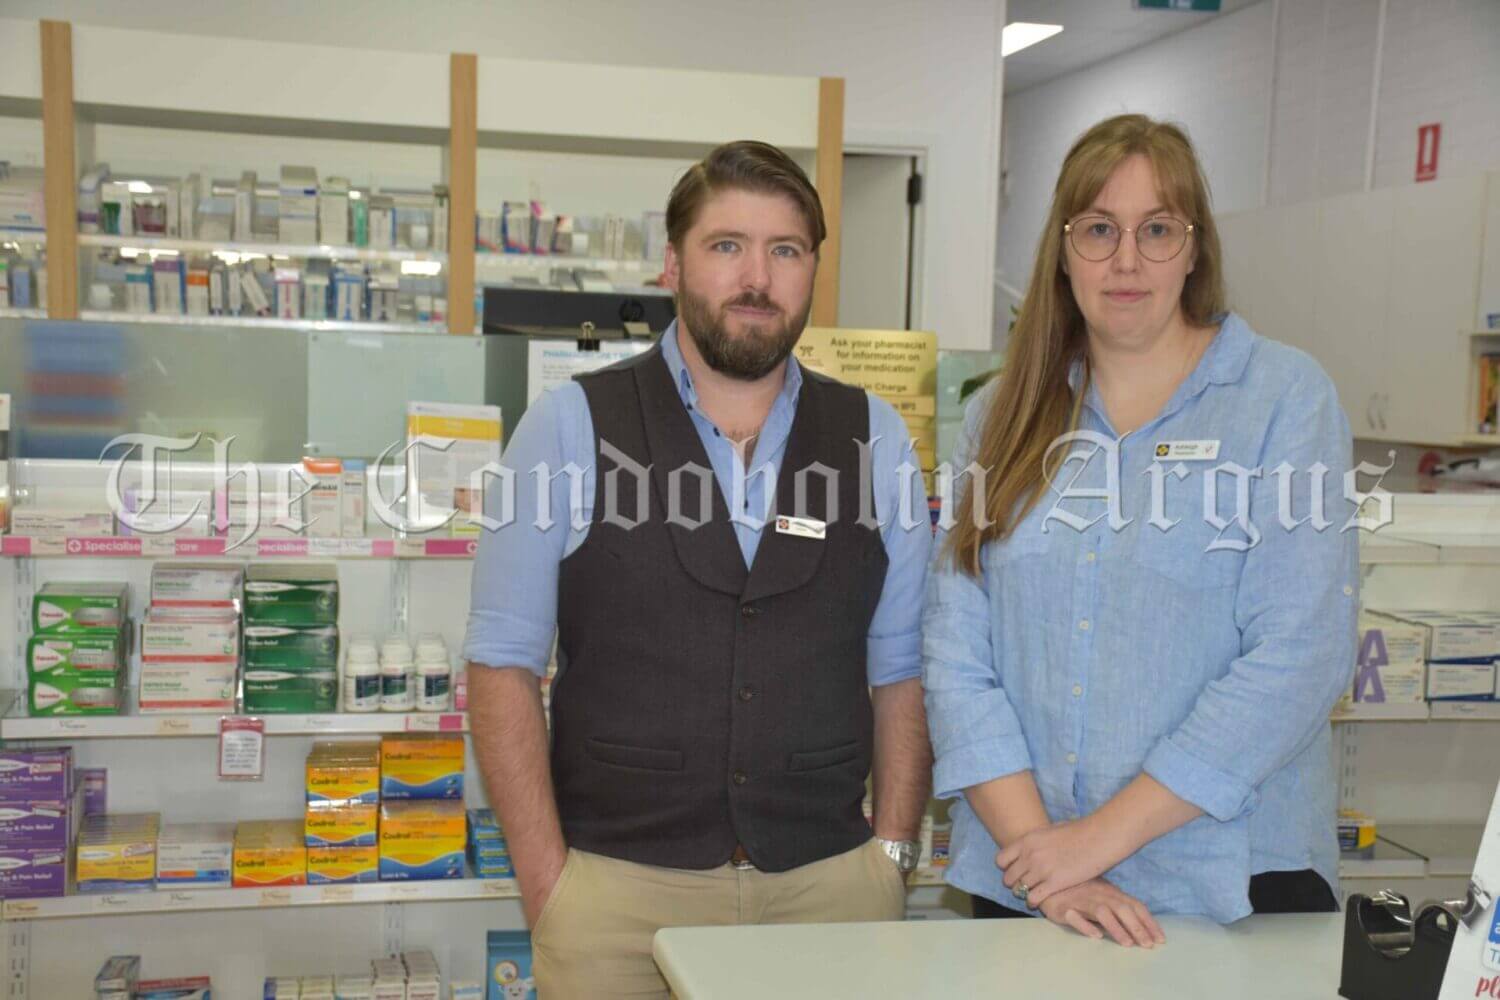 POLICY CHANGE TO HURT PHARMACY AND THE COMMUNITY